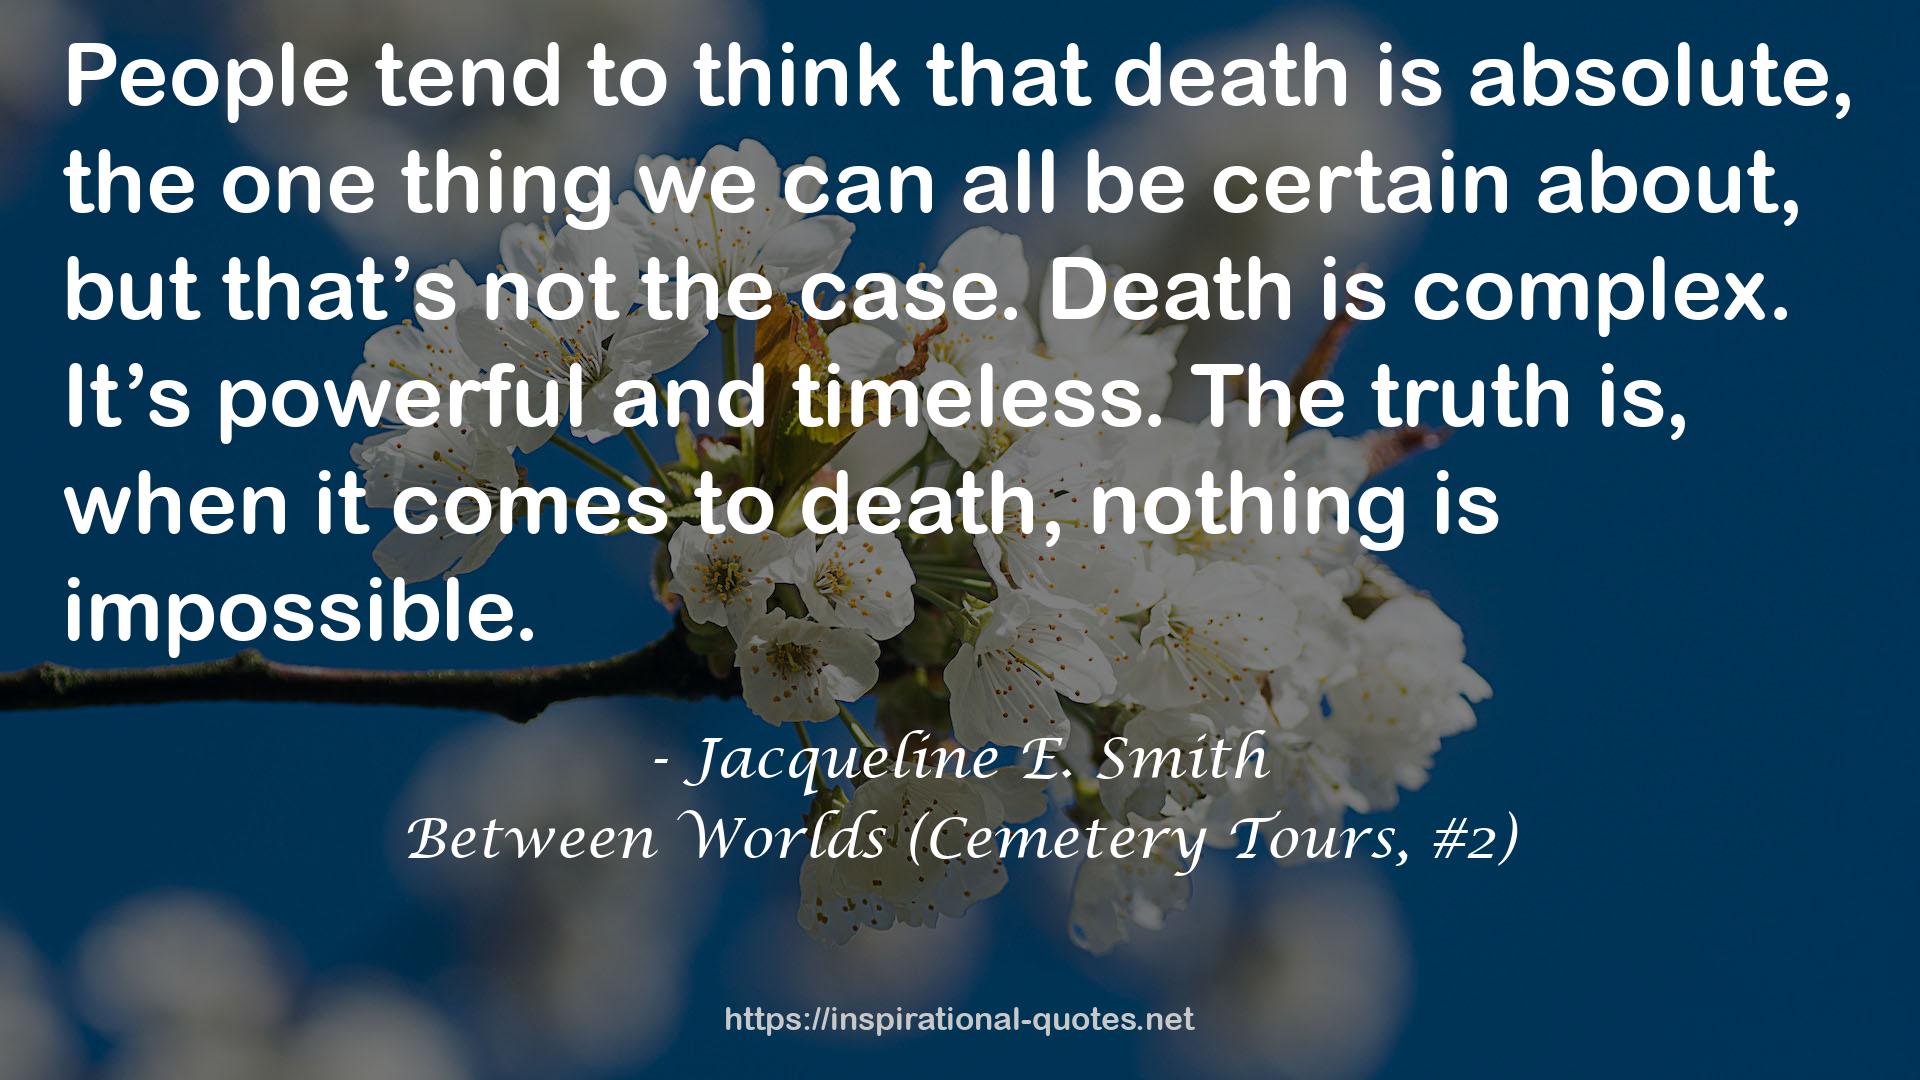 Between Worlds (Cemetery Tours, #2) QUOTES